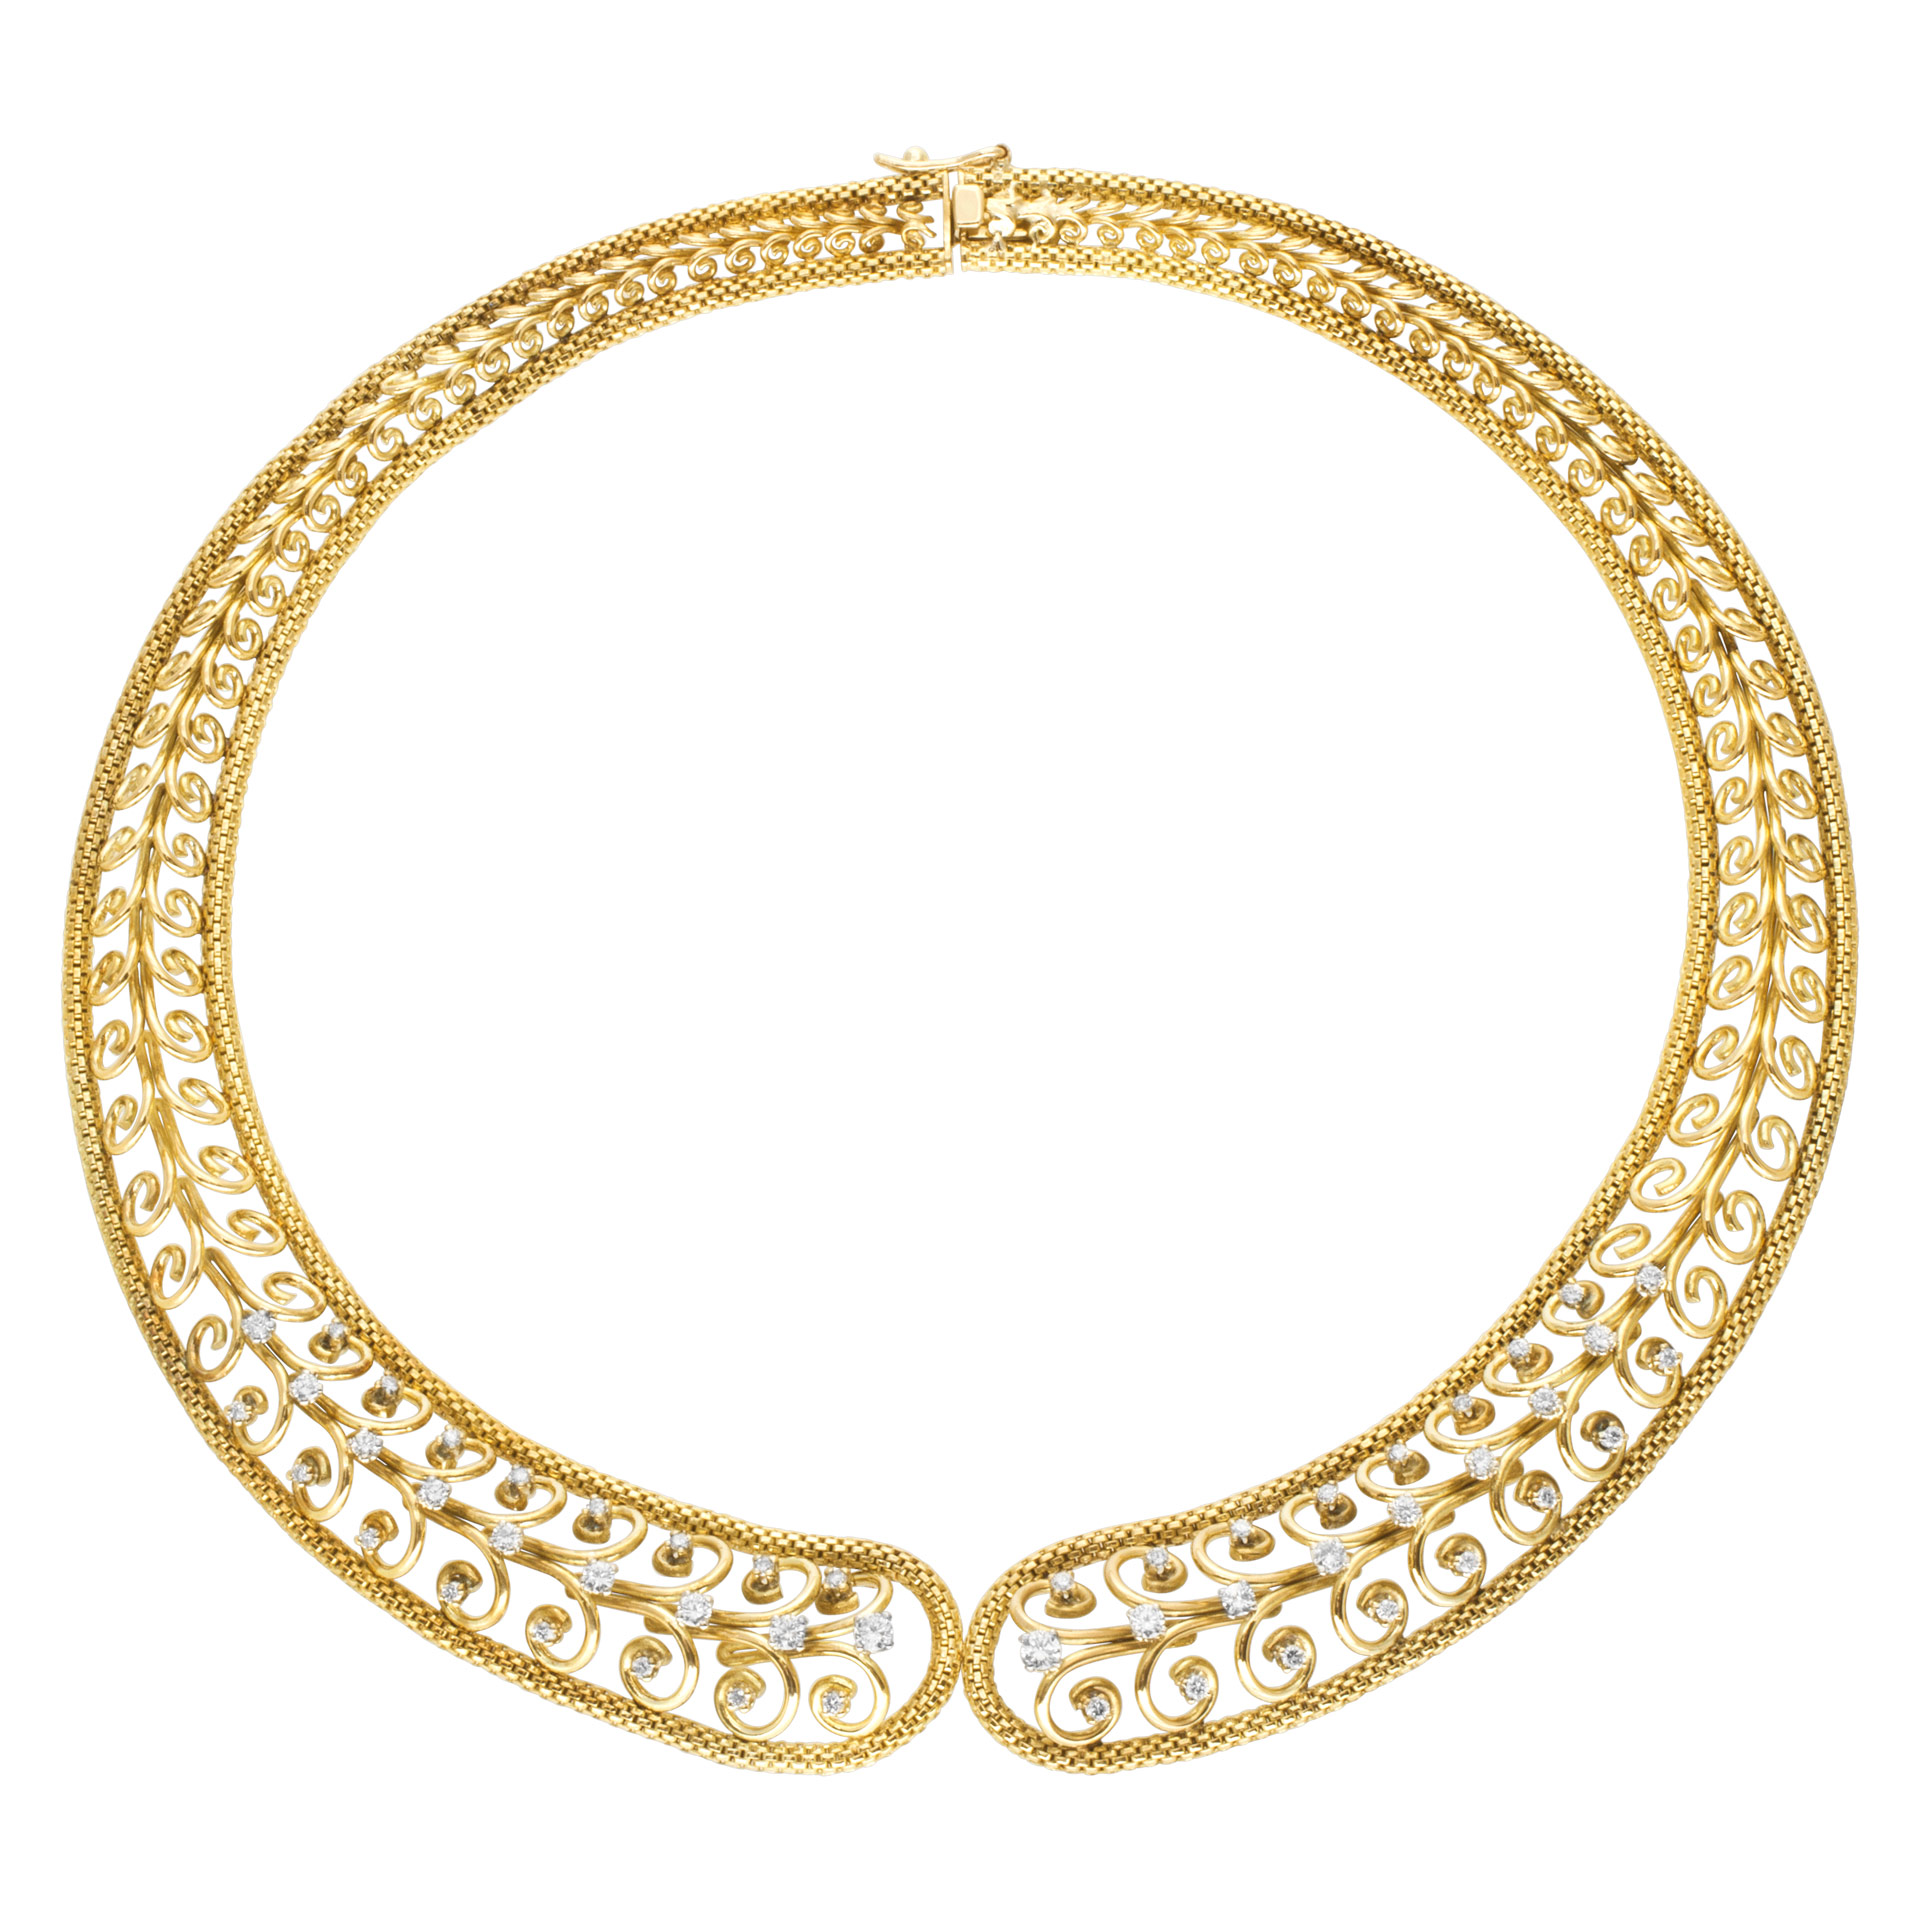 Swirl link choker necklace with diamond accents in 18k